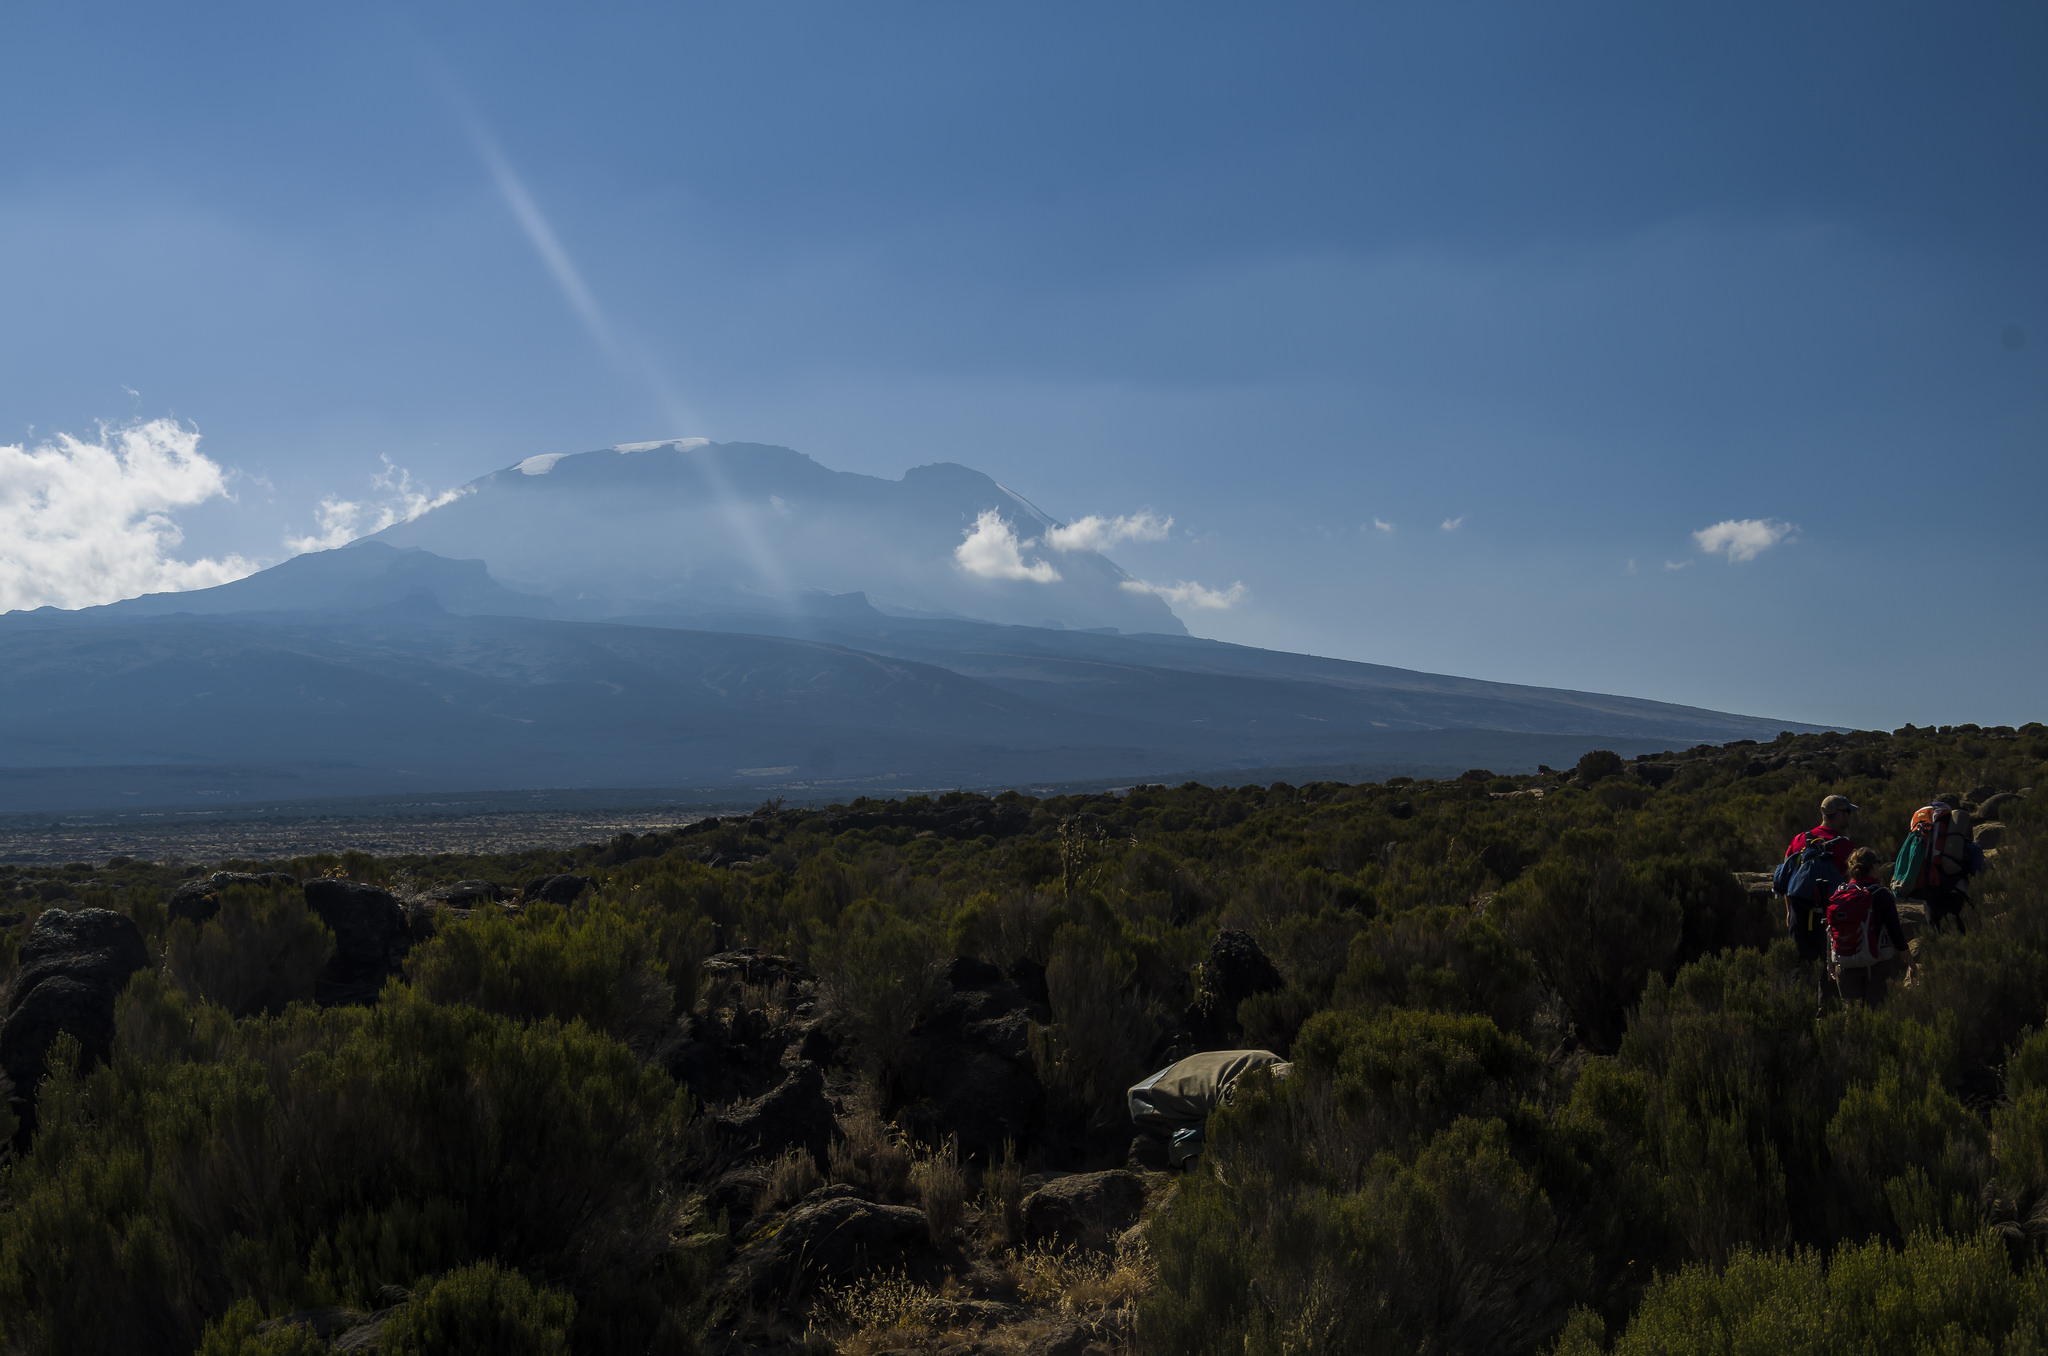 Summiting Kilimanjaro: gear list to the roof of Africa